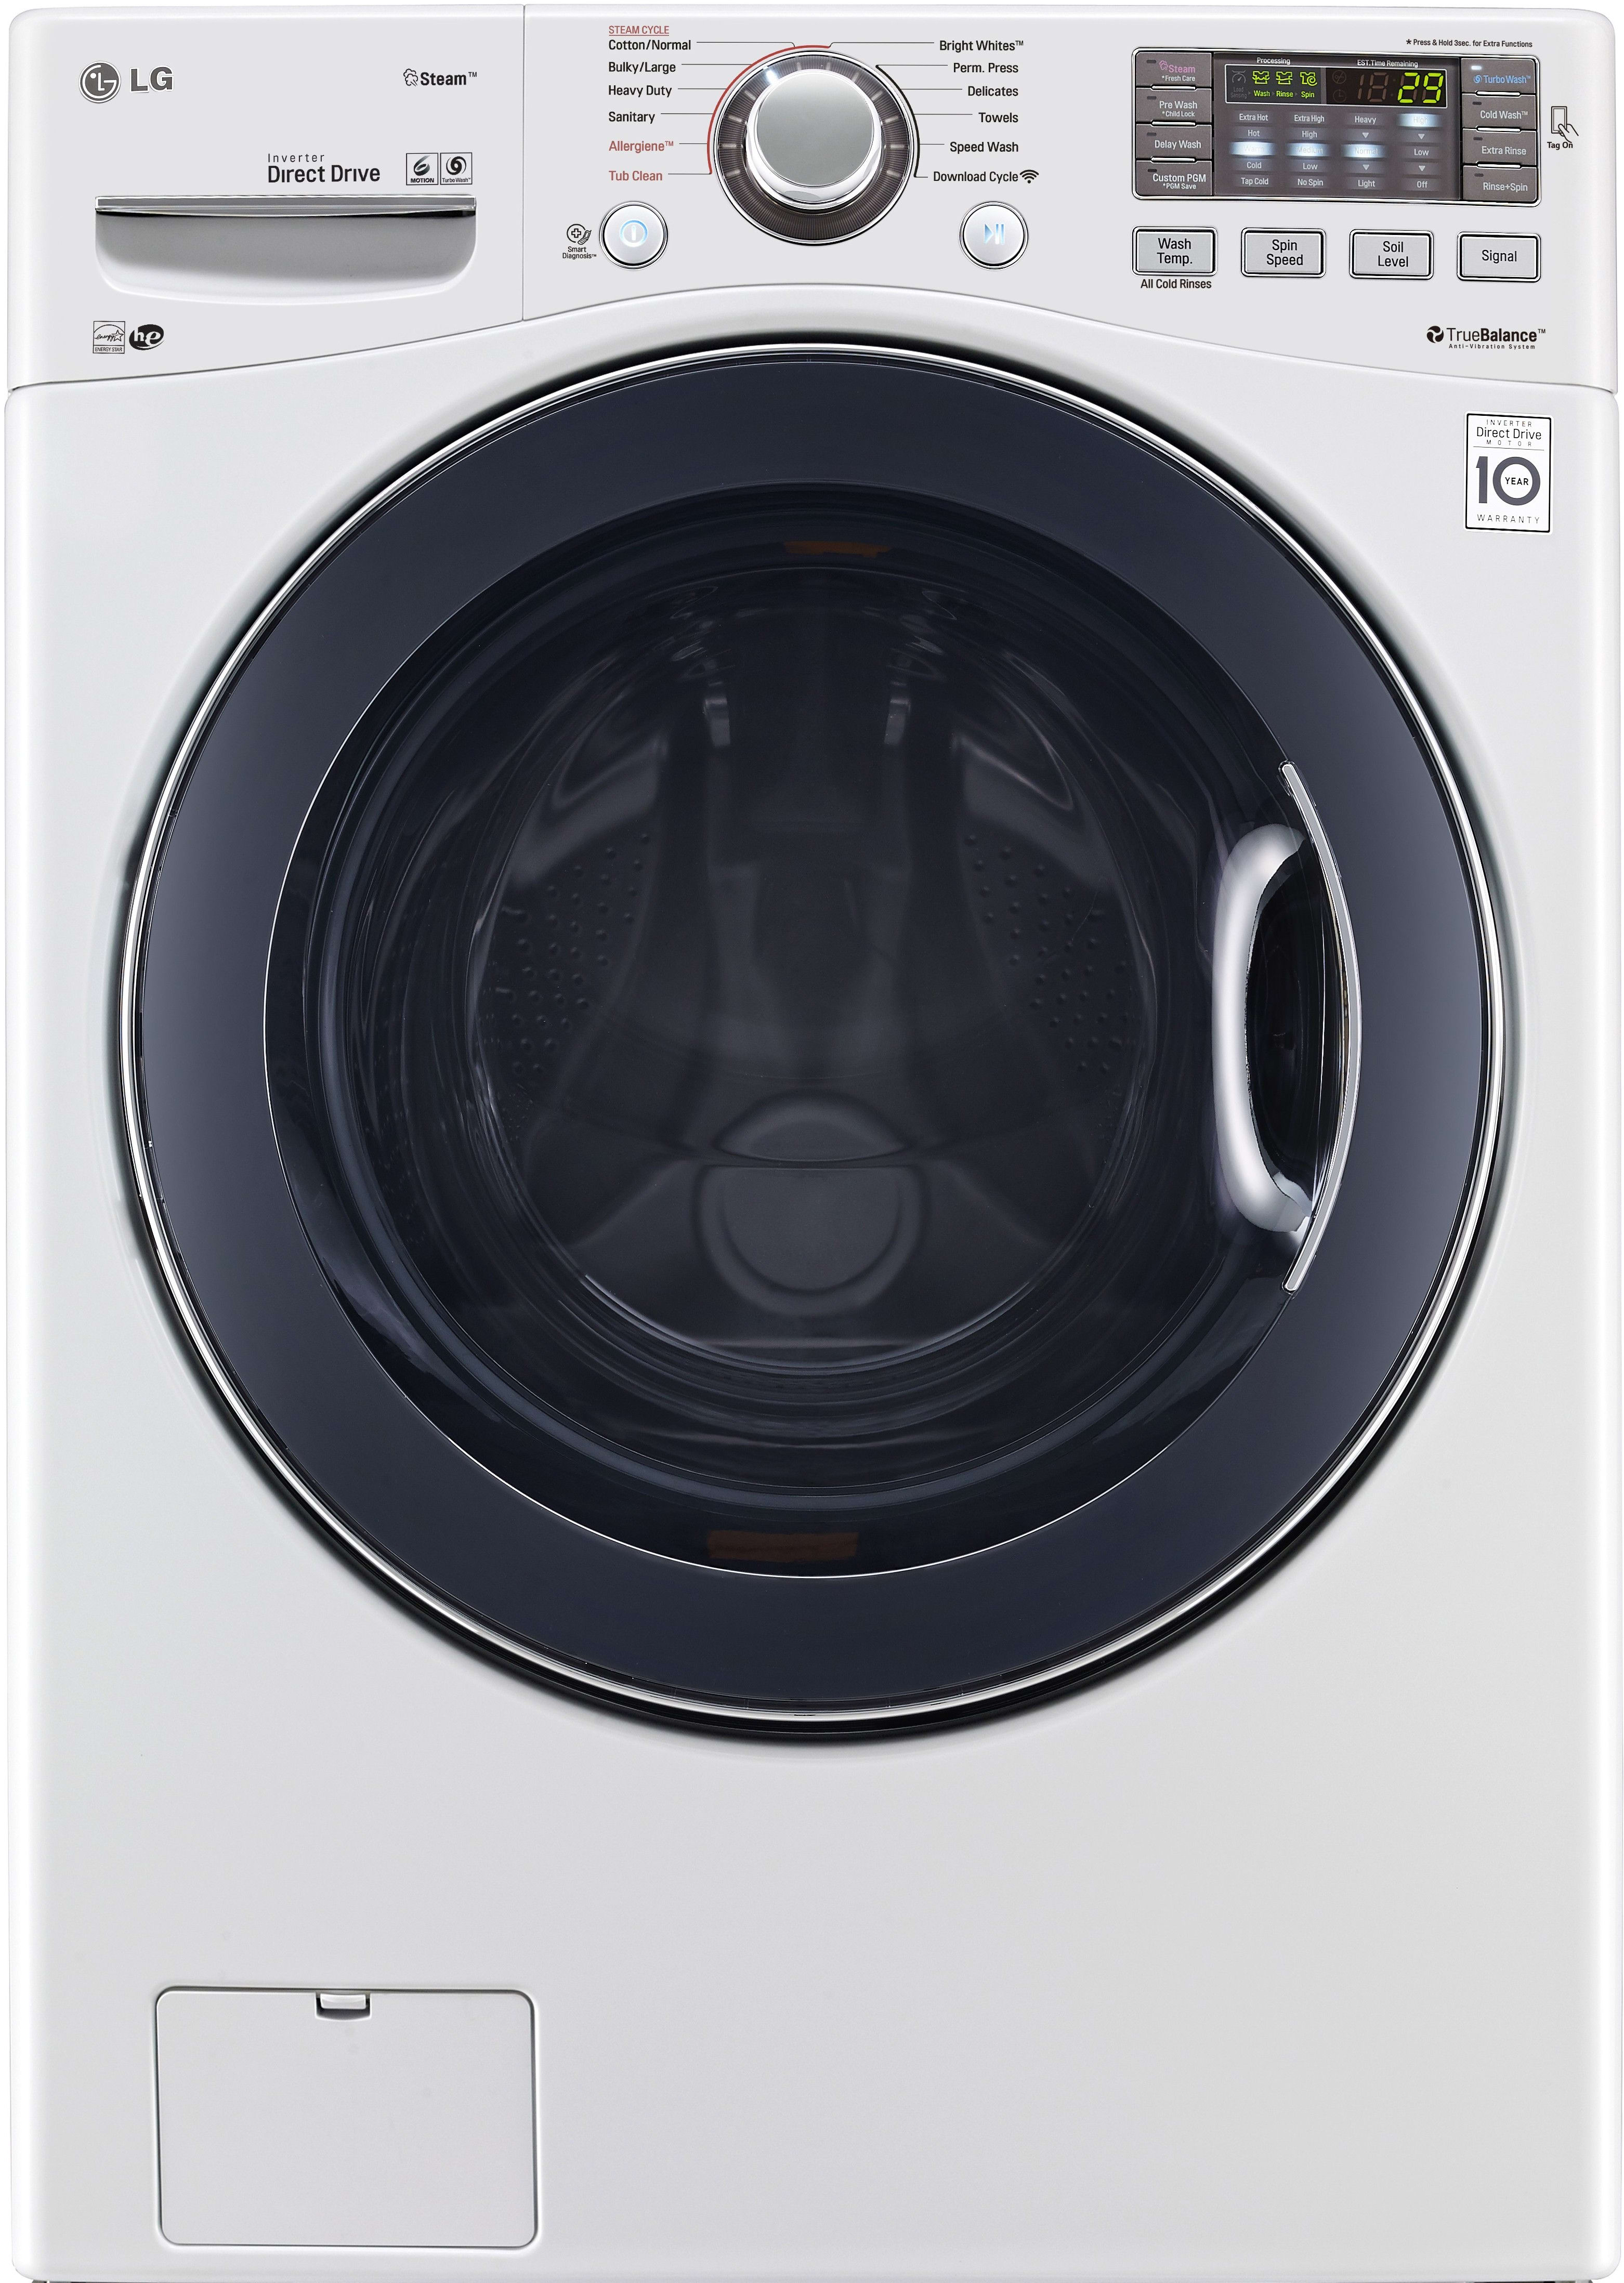 LG WM3570HWA 27 Inch 4 3 Cu Ft Front Load Washer With 12 Wash Cycles 